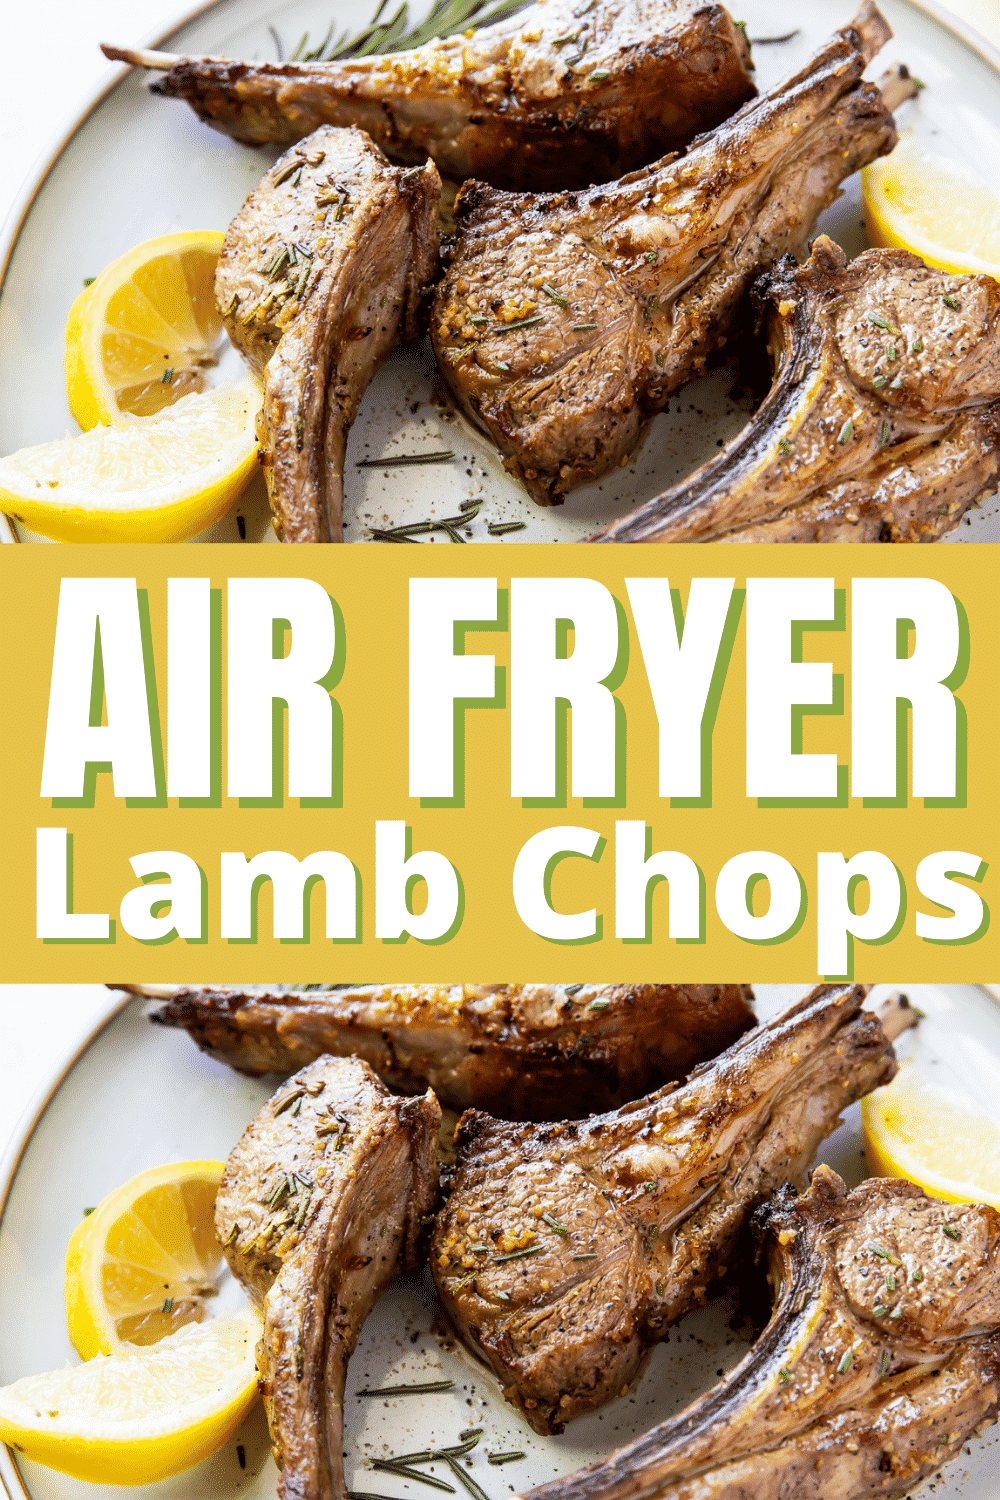 Air Fryer Lamb Chops are cooked perfectly in under 10 minutes. These lamb chops are perfectly seasoned with a flavorful marinade and make an impressive dinner for your family or guests. #airfryer #lamb #lambchops via @vegetarianmamma